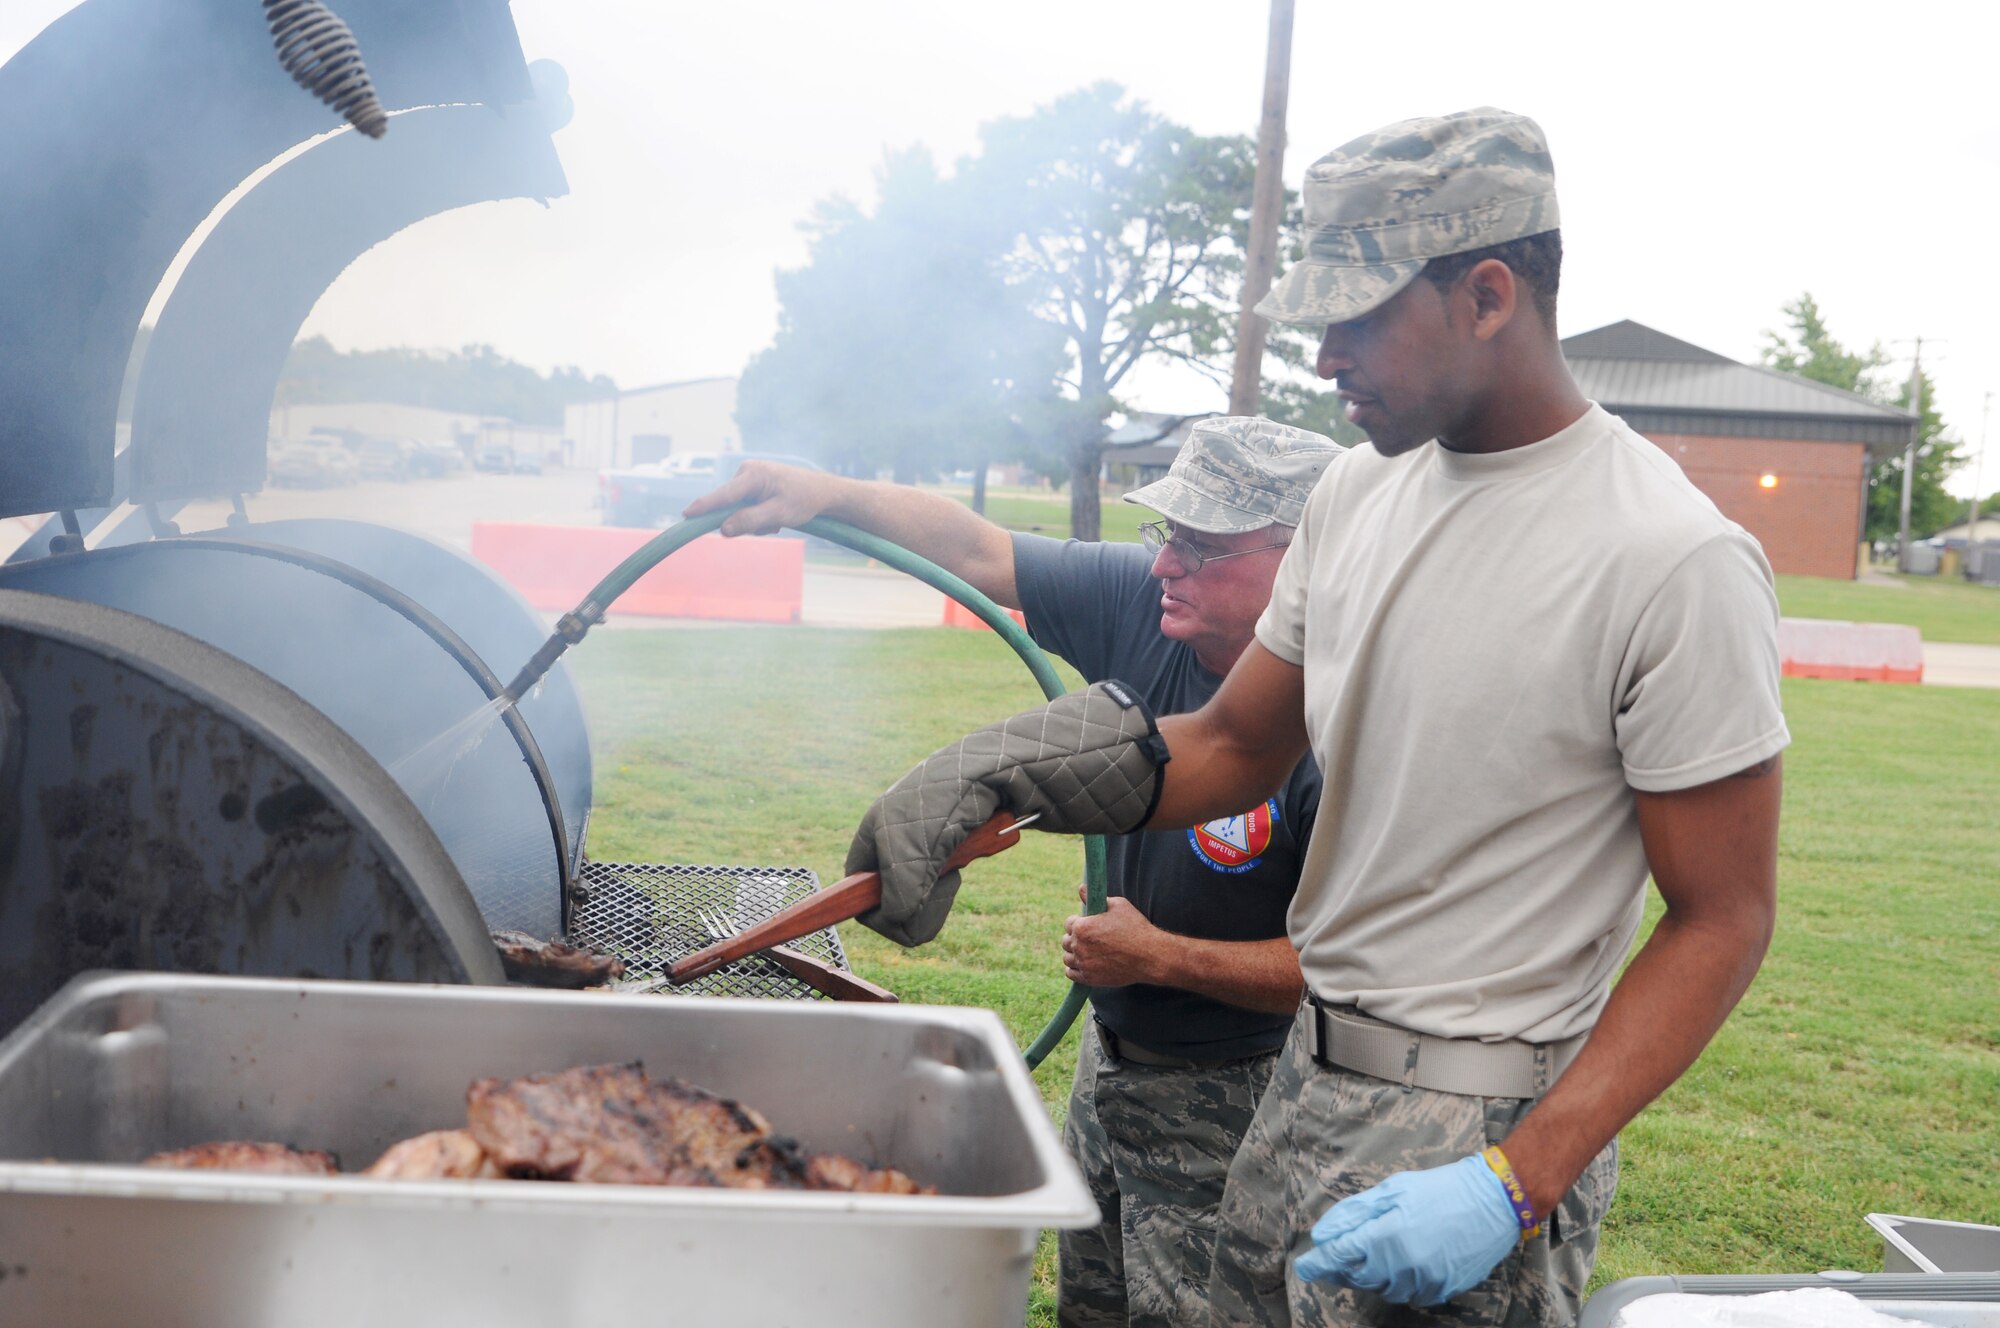 Tech. Sgt. Ricky Brown and Senior Airman Antoine Leaks, 188th Force Support Squadron, prepare a surf and turf meal Sept. 20, 2015 by cooking steaks on a grill at Ebbing Air National Guard Base, Fort Smith, Ark. The 188th Wing’s surf and turf meal is an annual tradition provided at the end of the fiscal year. (U.S. Air National Guard photo by Senior Airman Cody Martin/Released)